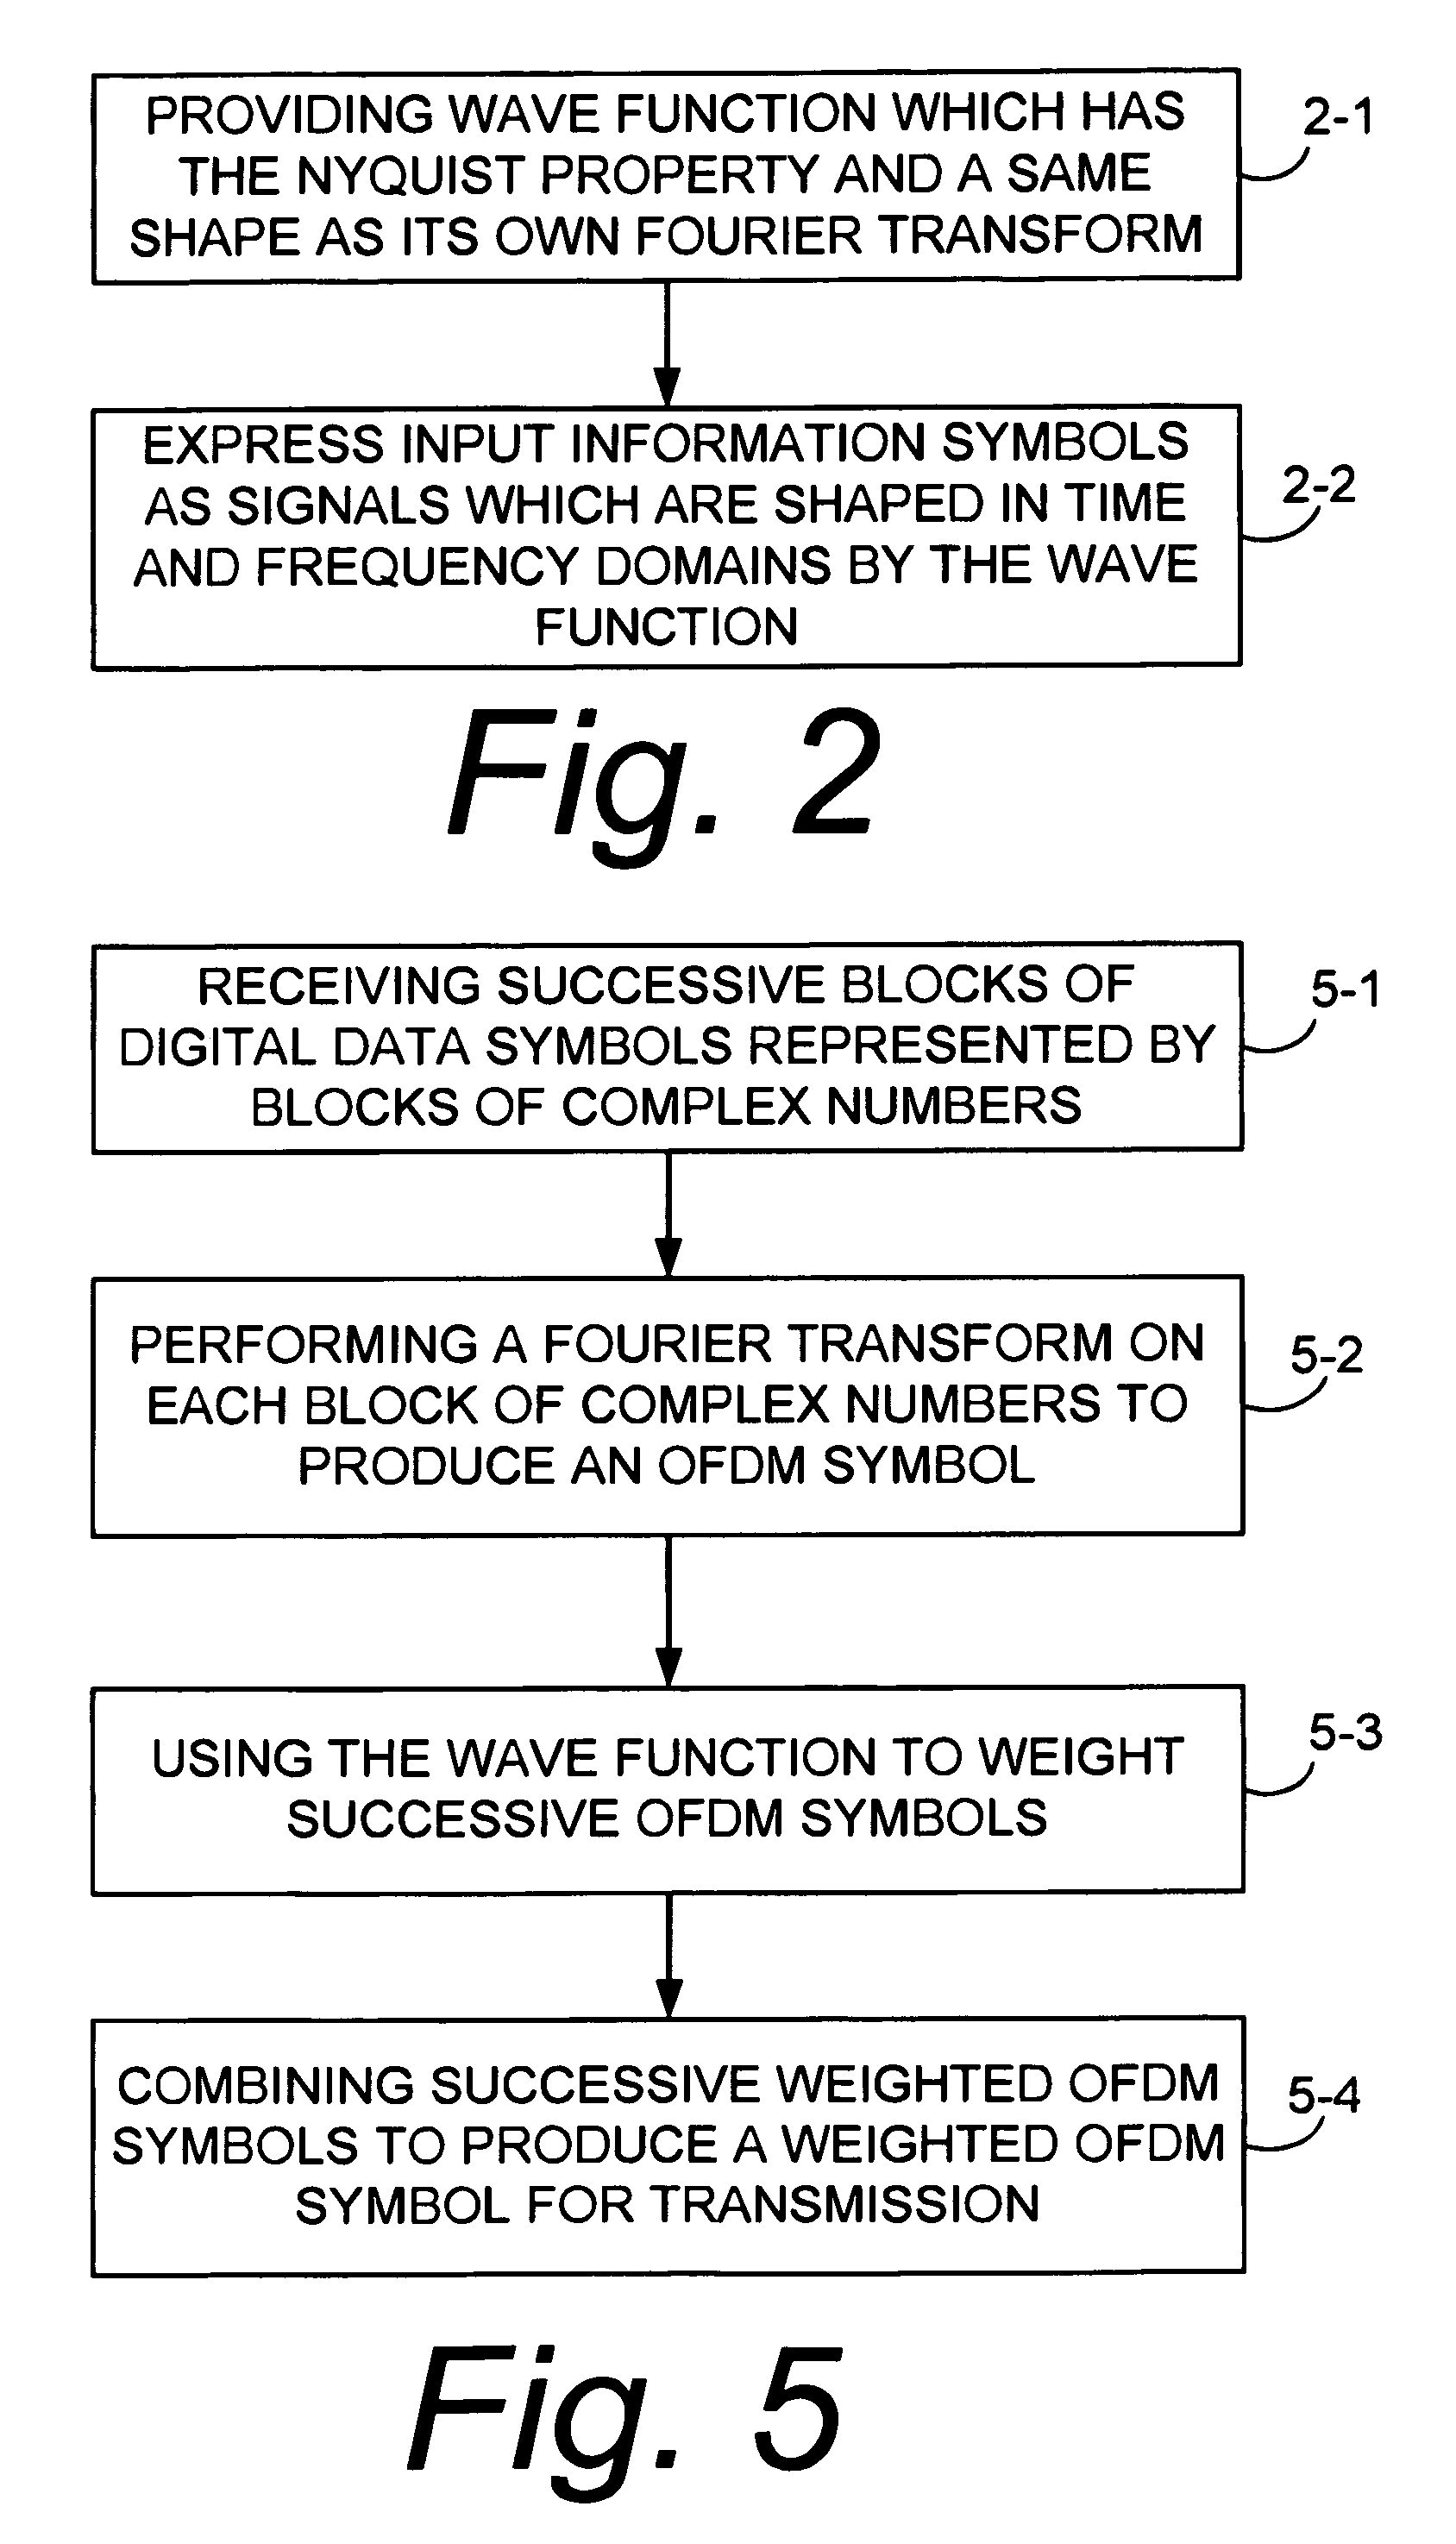 Method and apparatus for communicating with root-nyquist, self-transform pulse shapes